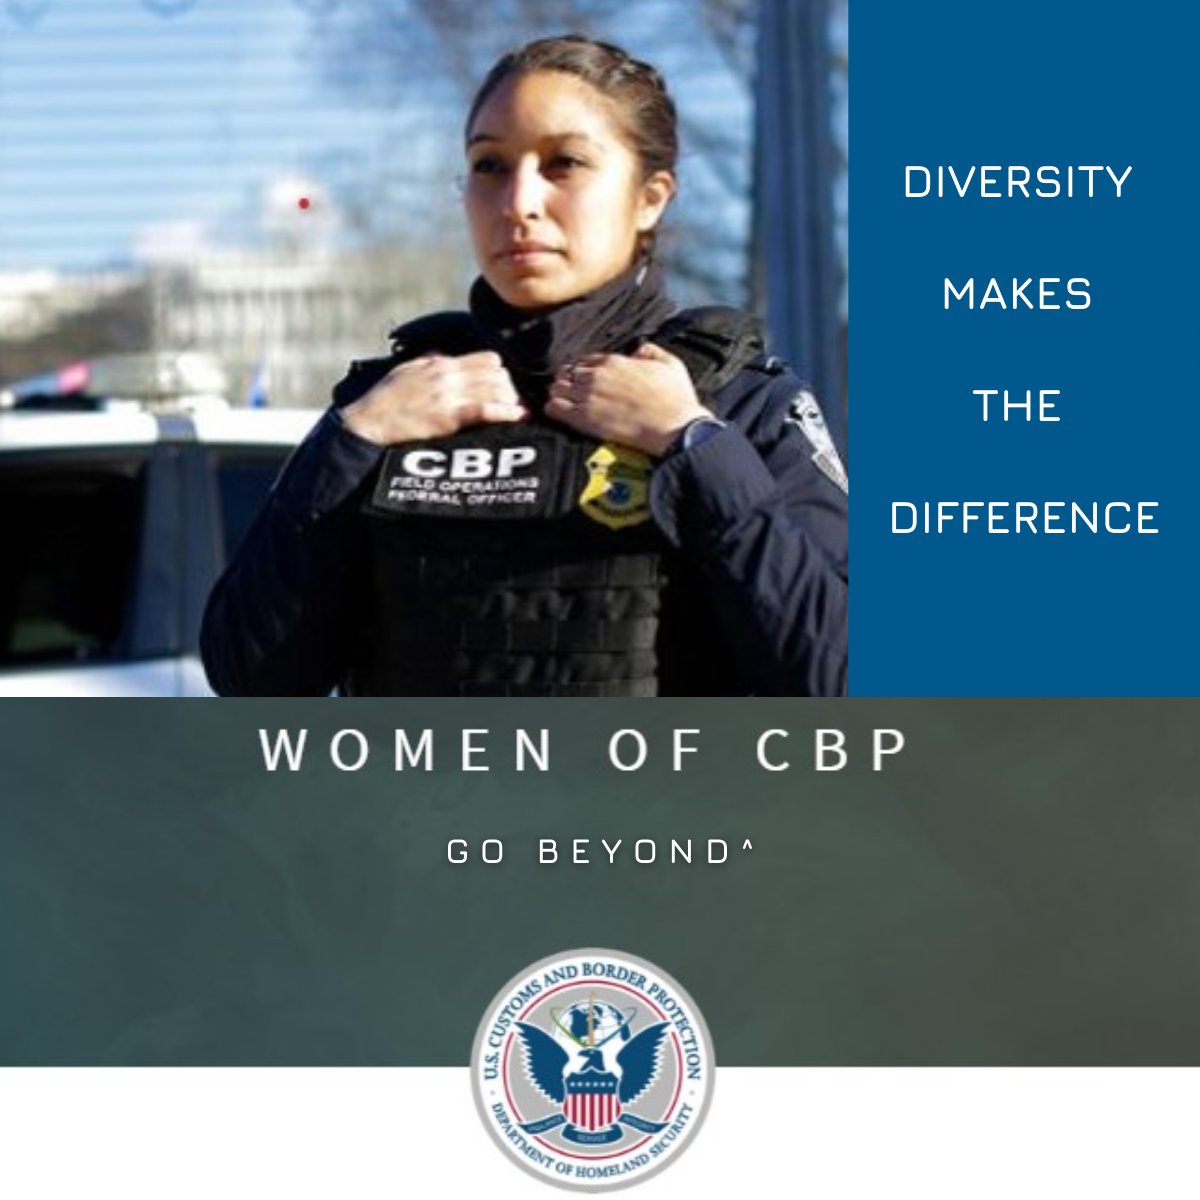 Attention women! Are you interested in a position in law enforcement? Why not a career with CBP? We are committed to the @30x30initiative, increasing the ranks of women in law enforcement to 30% by 2030. Explore here: careers.cbp.gov/s/ #WomenInLawEnforcement #CBPCareers